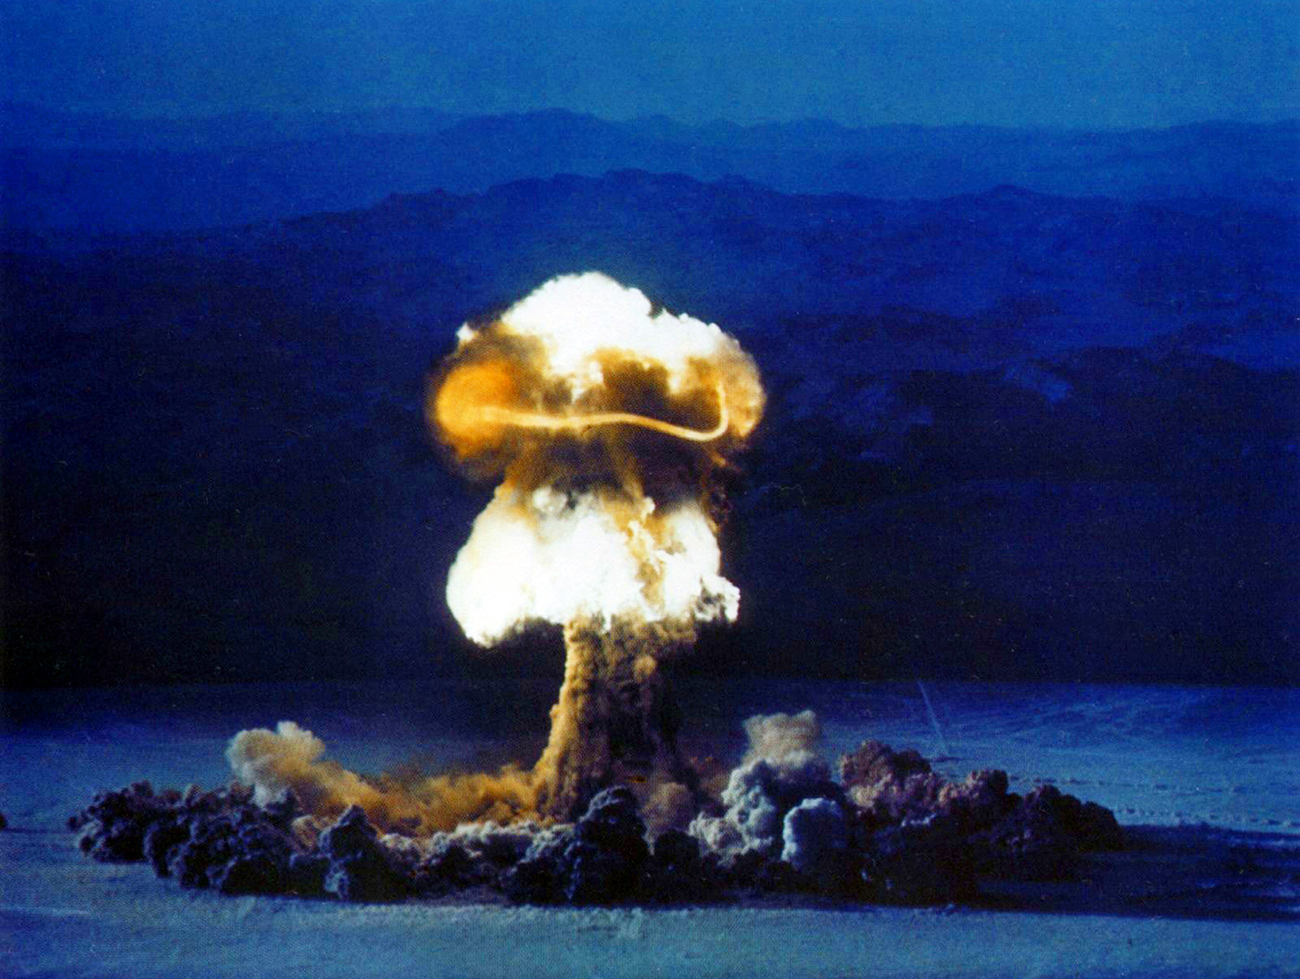 According to the Moscow Treaty, any kind of nuclear testing was prohibited.